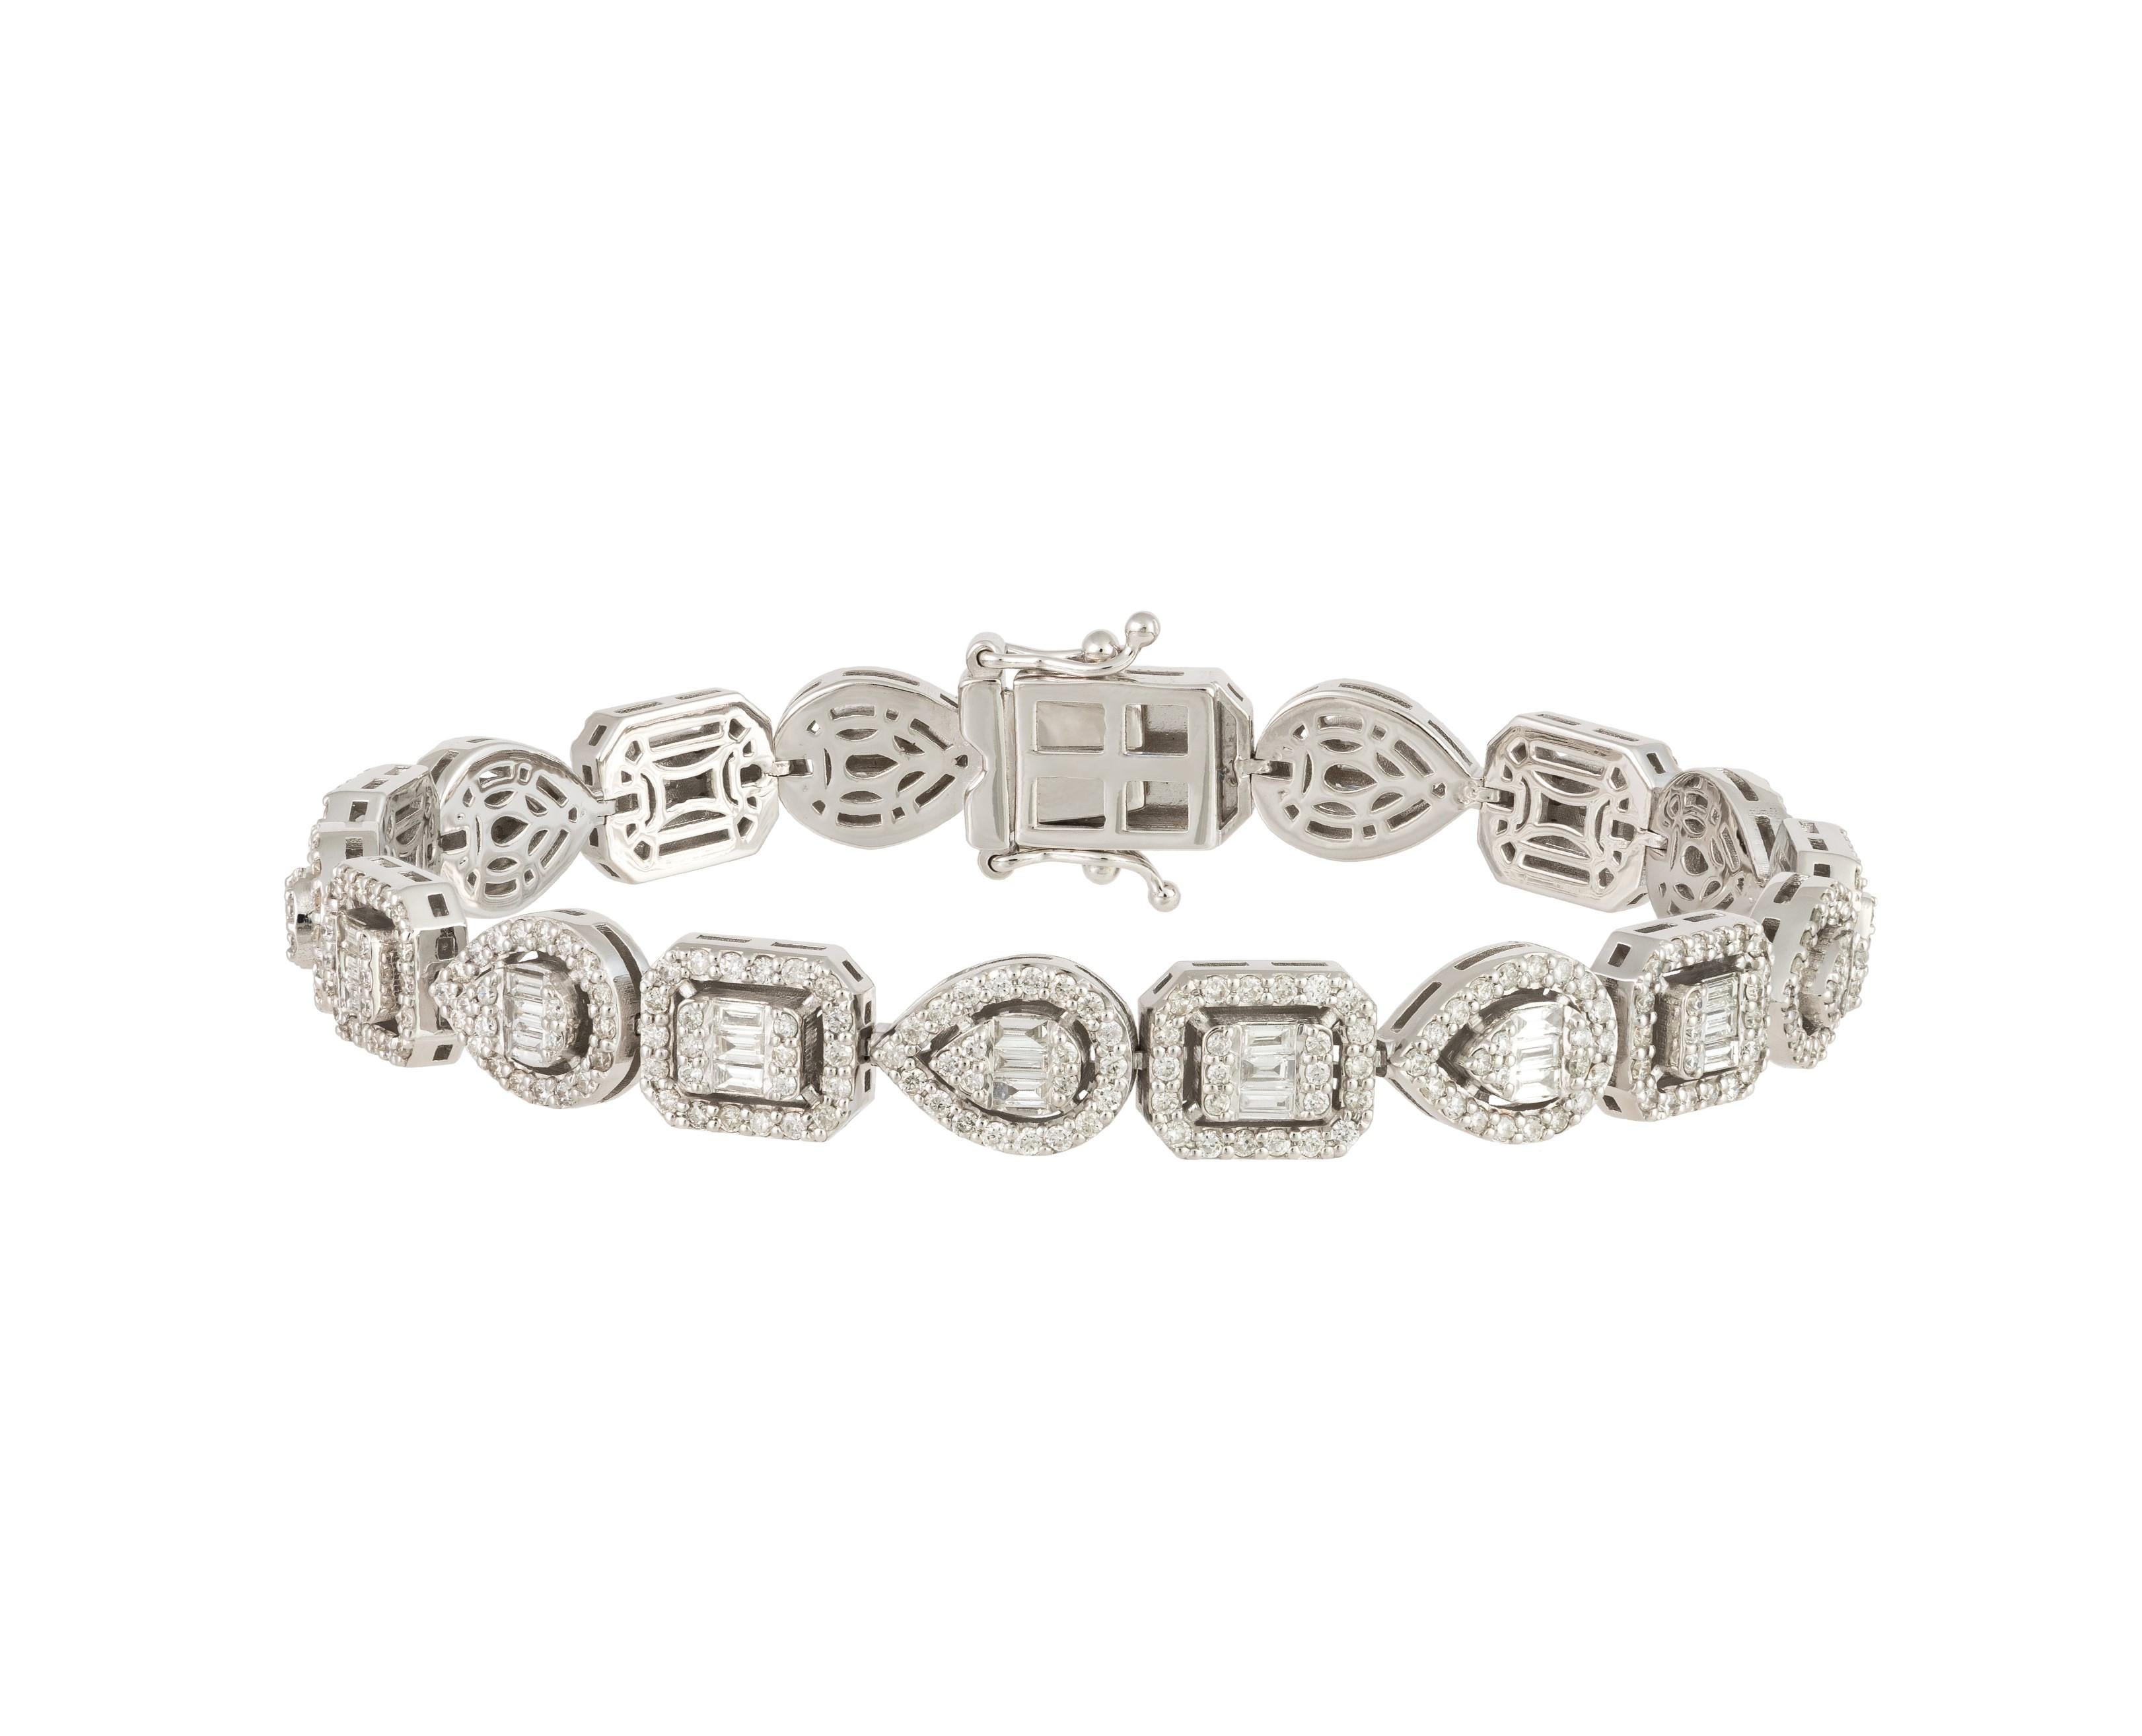 The Following Item we are offering is this Beautiful Rare Important 18KT White Gold Large Glittering Fancy Shaped Diamond Tennis Bracelet. Bracelet is comprised of approx 3.50CTS Magnificent Rare Gorgeous Fancy Glittering Diamonds!!! The Diamonds